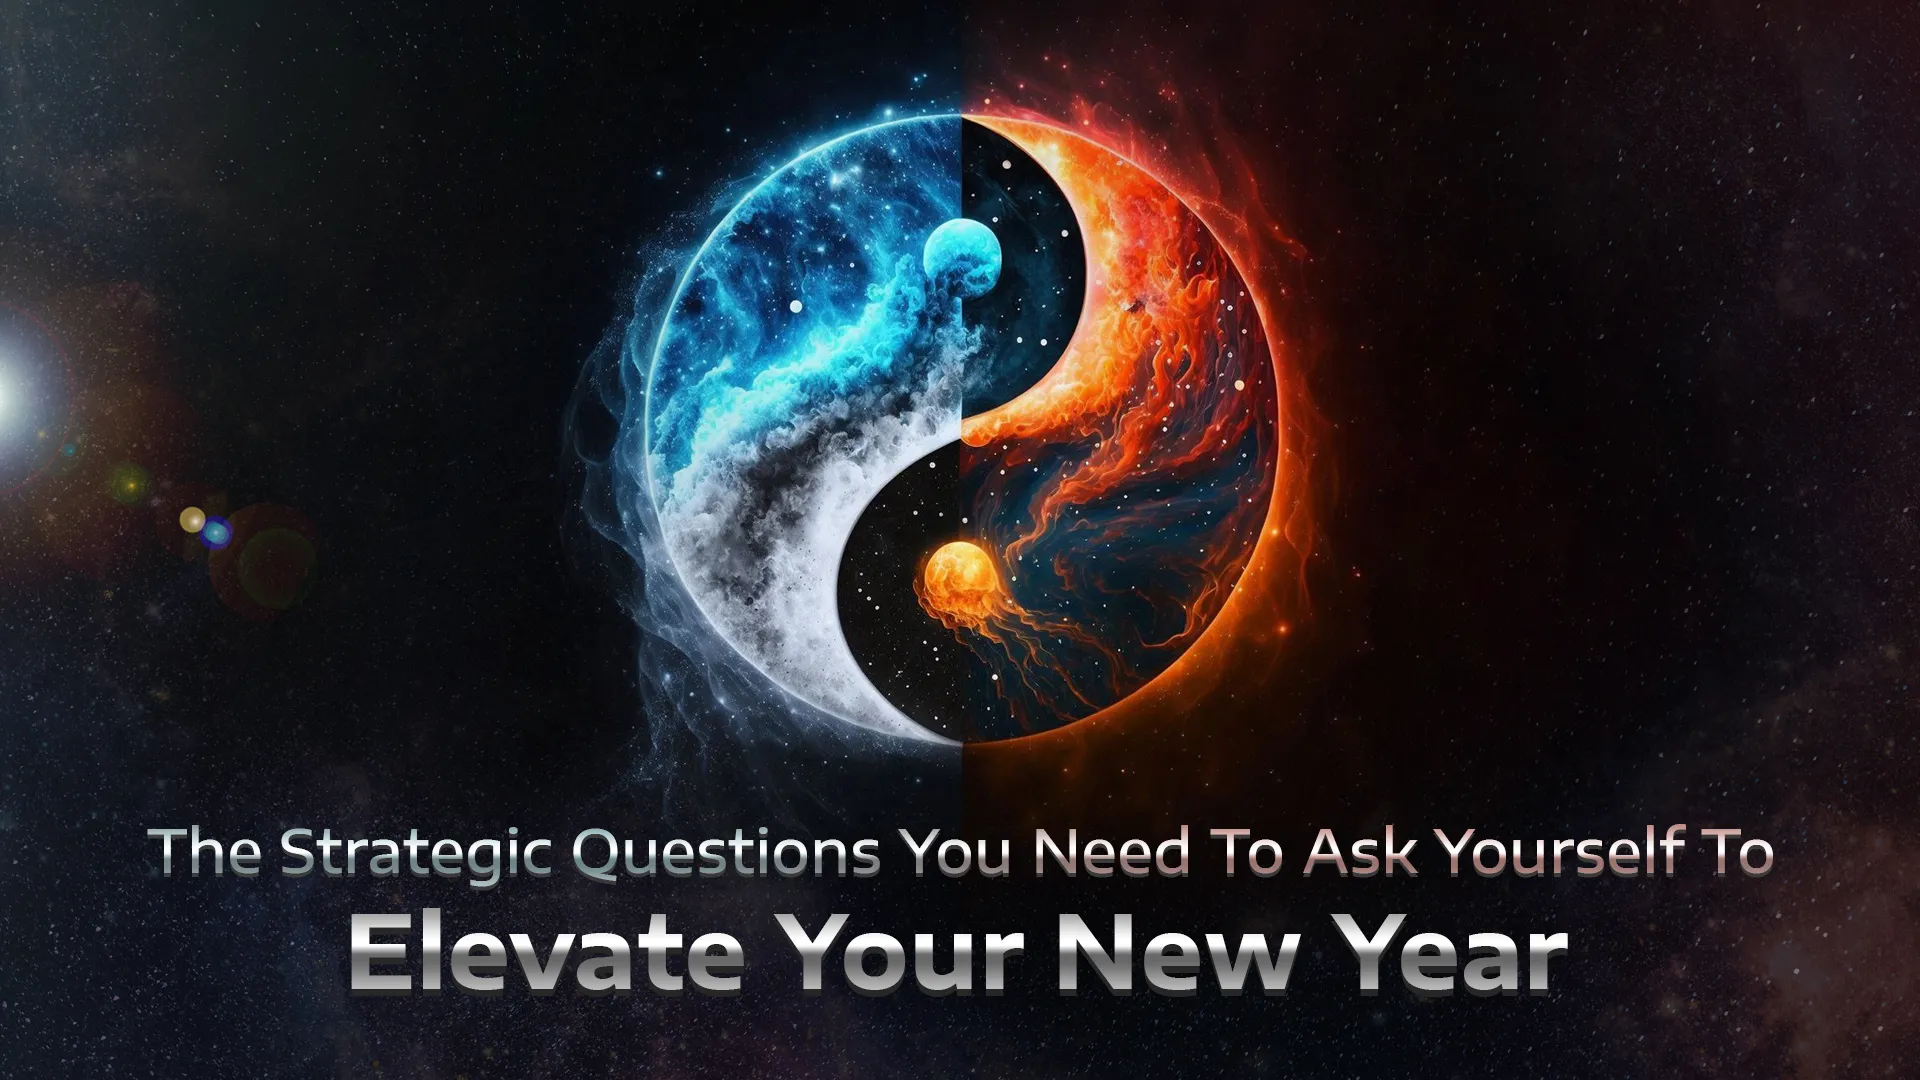 The Strategic Questions You Need To Ask Yourself To Elevate Your New Year